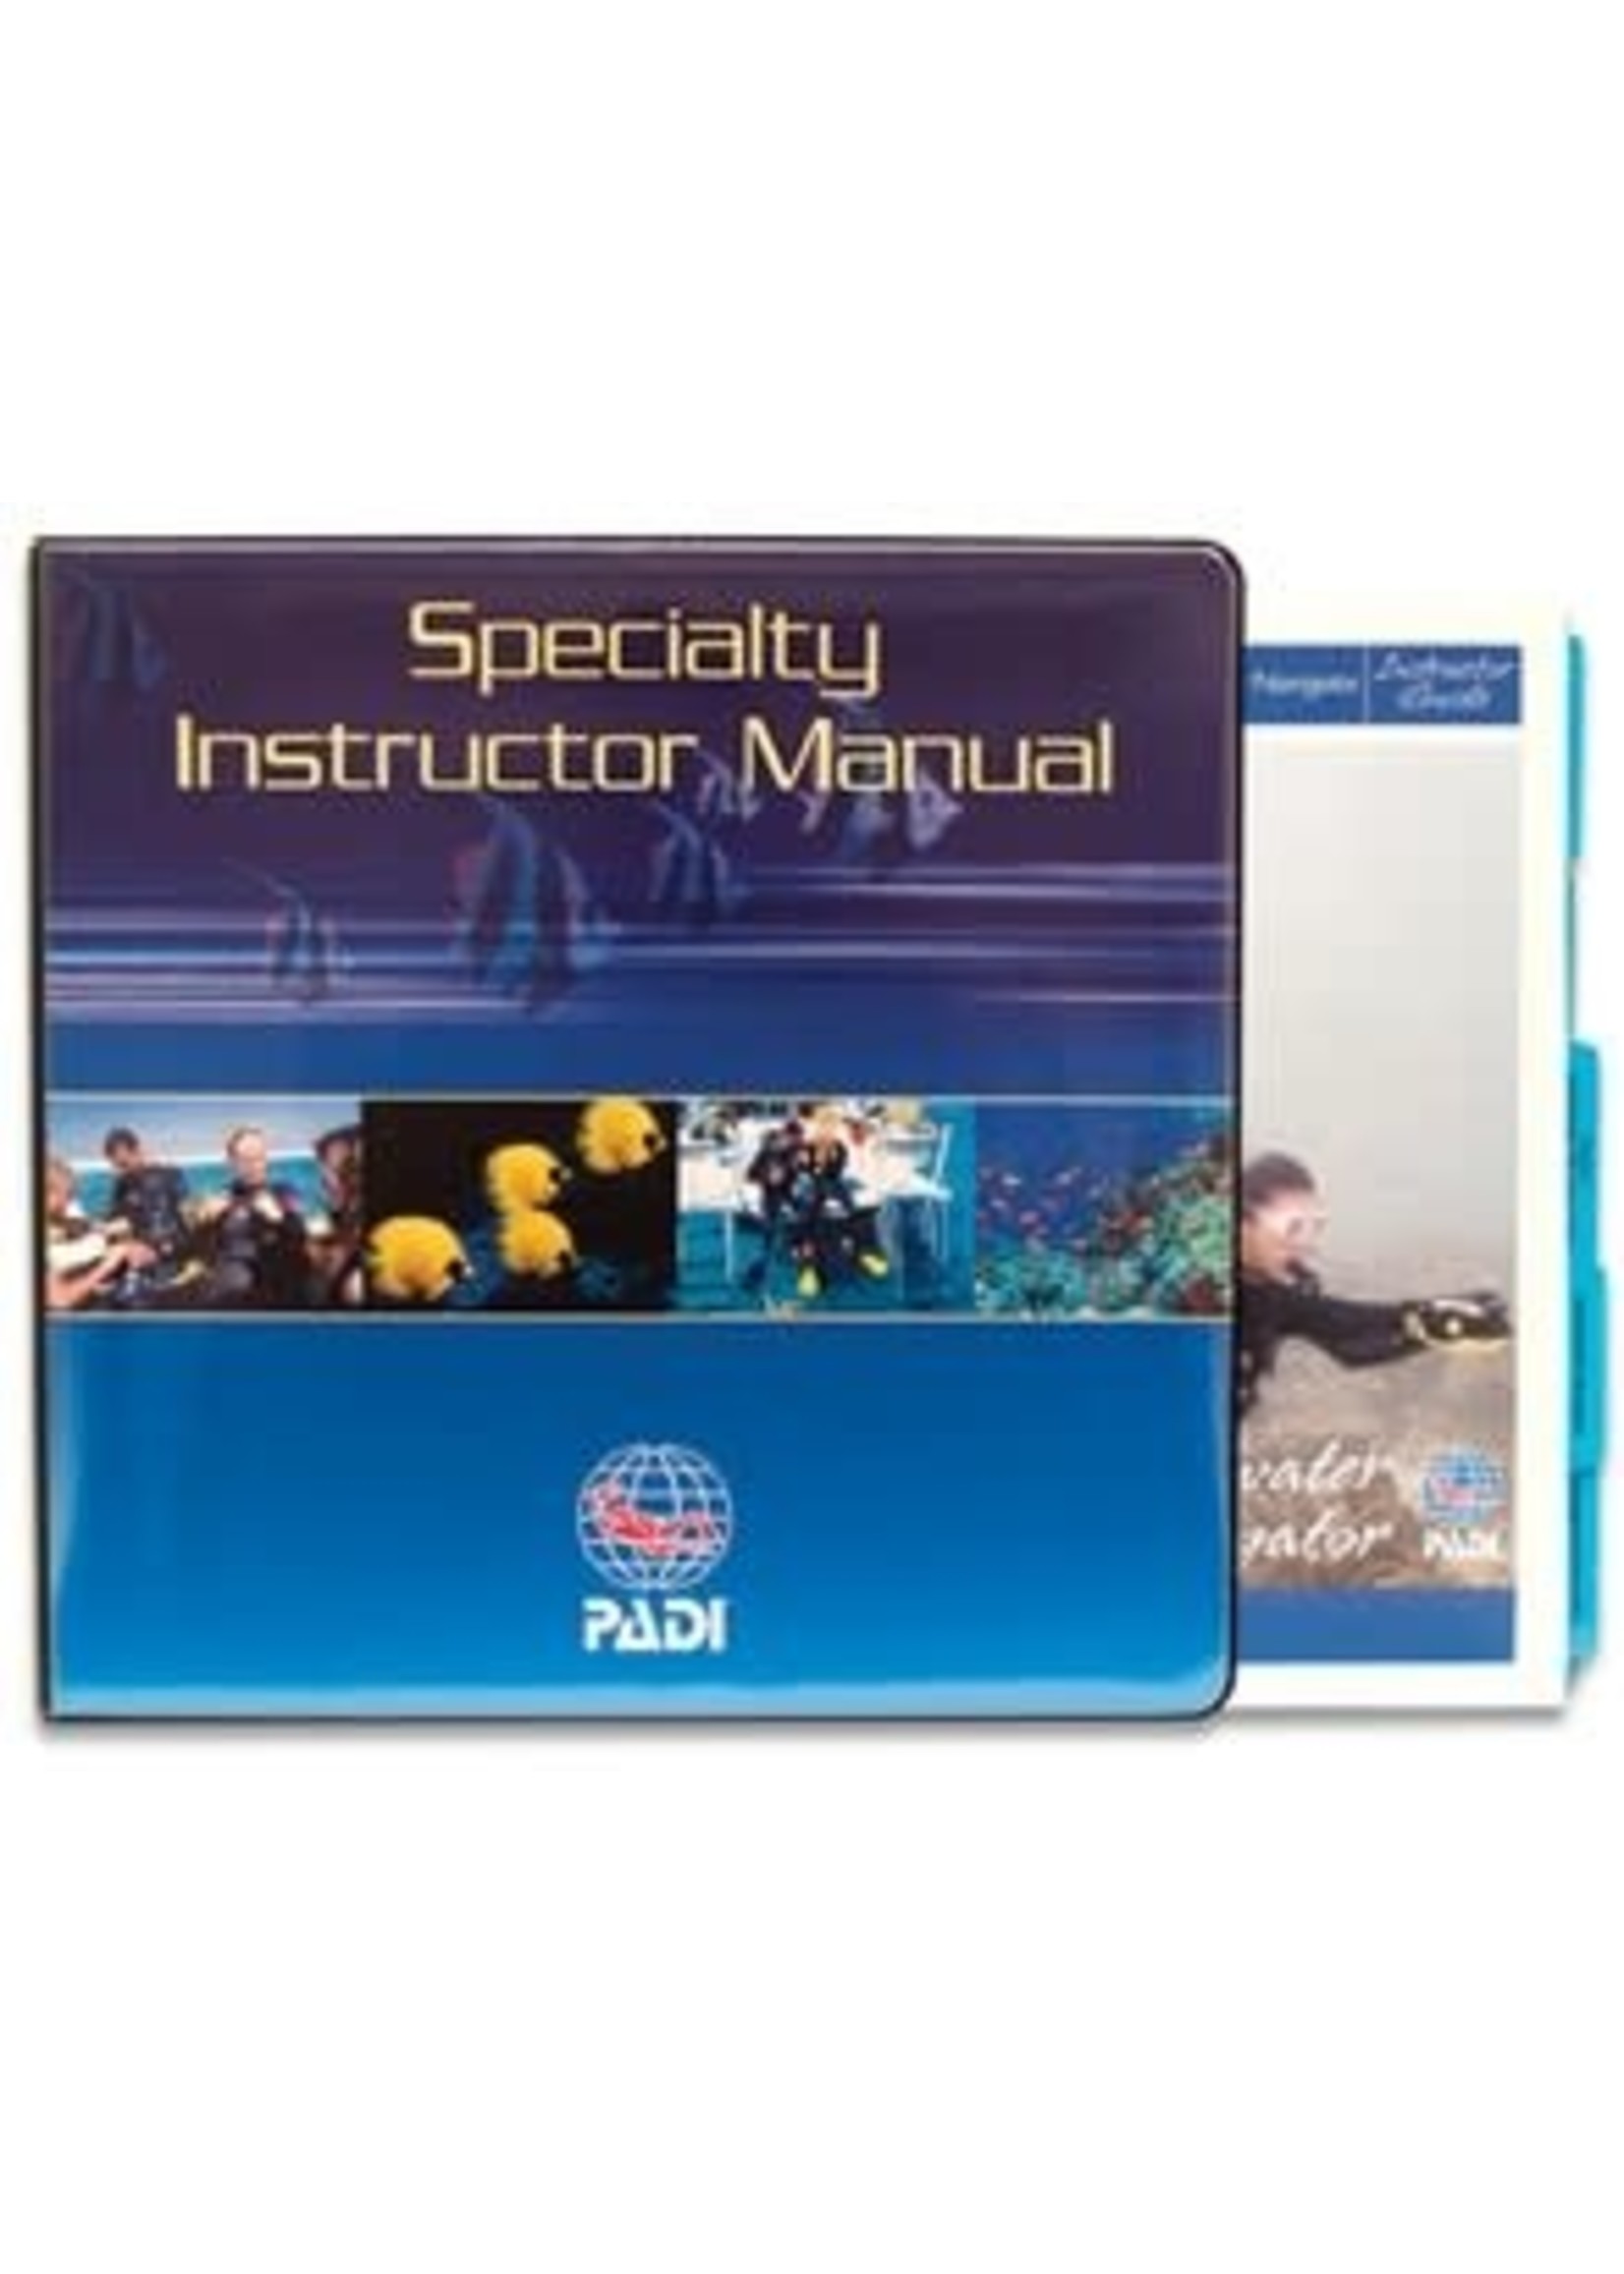 PADI Manual - Specialty Course Instructor Outlines